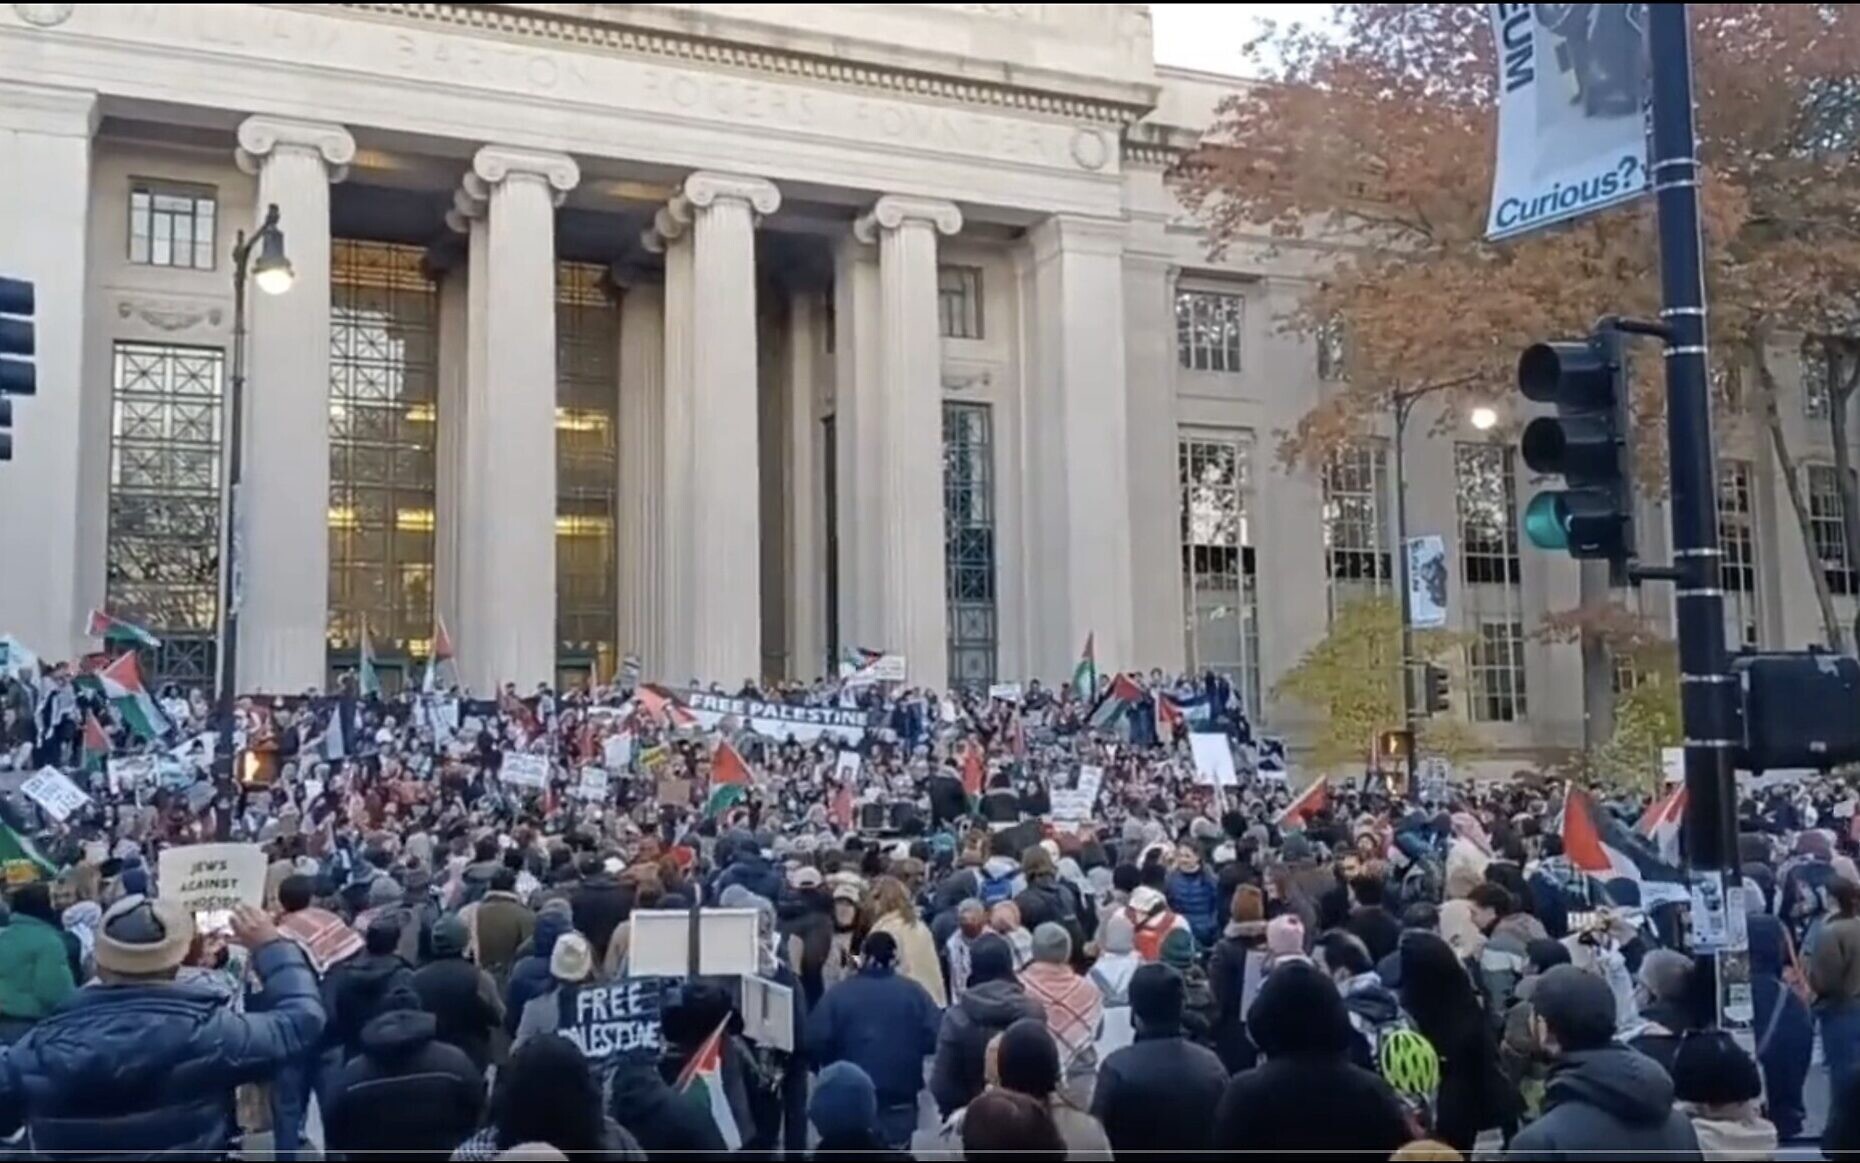 MIT partially suspends students who occupied building for pro-Palestinian  'die-in